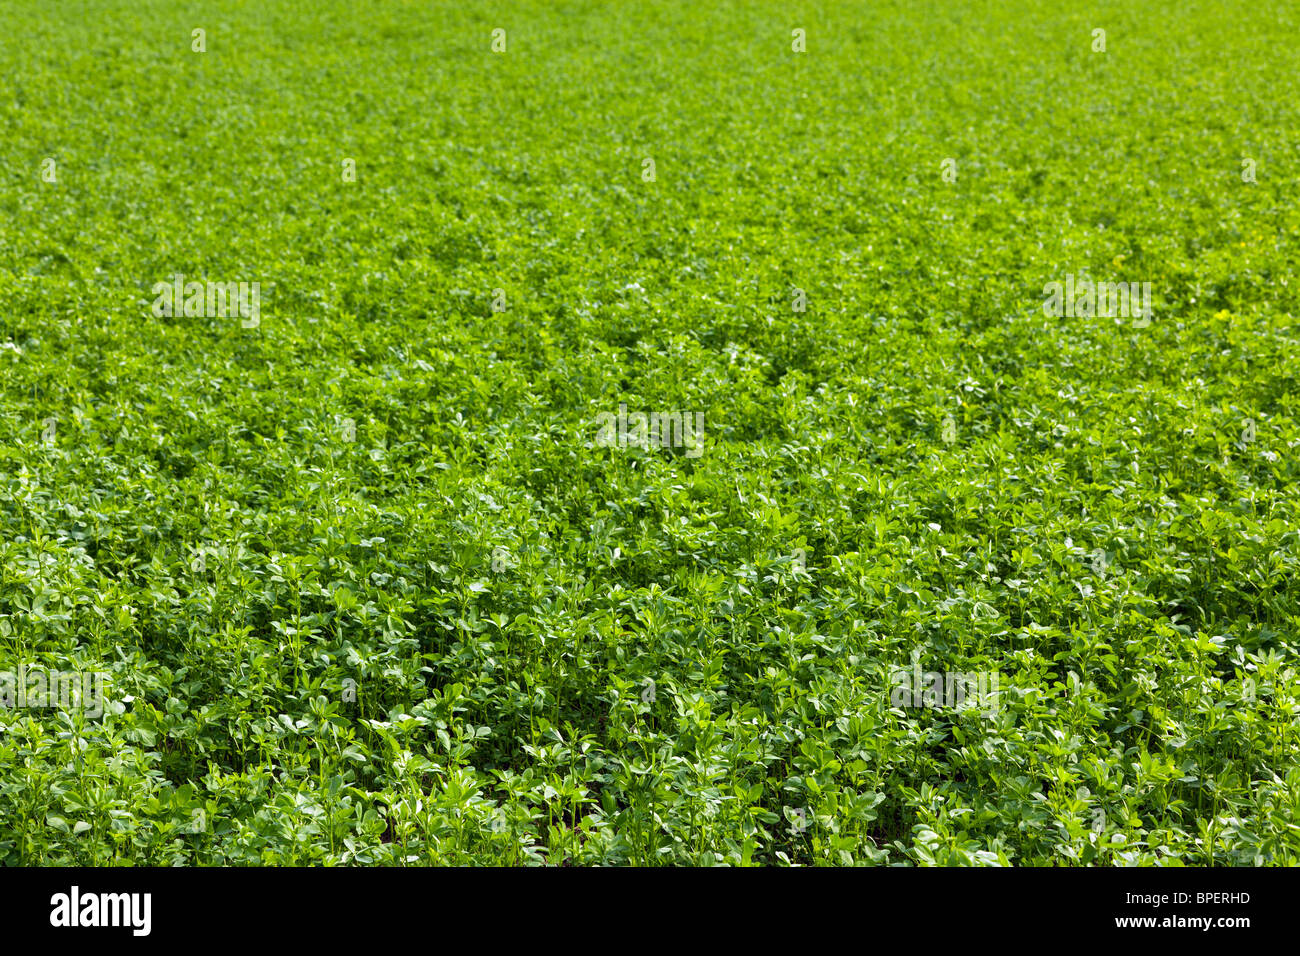 alfalfa cultivated field in french country Stock Photo